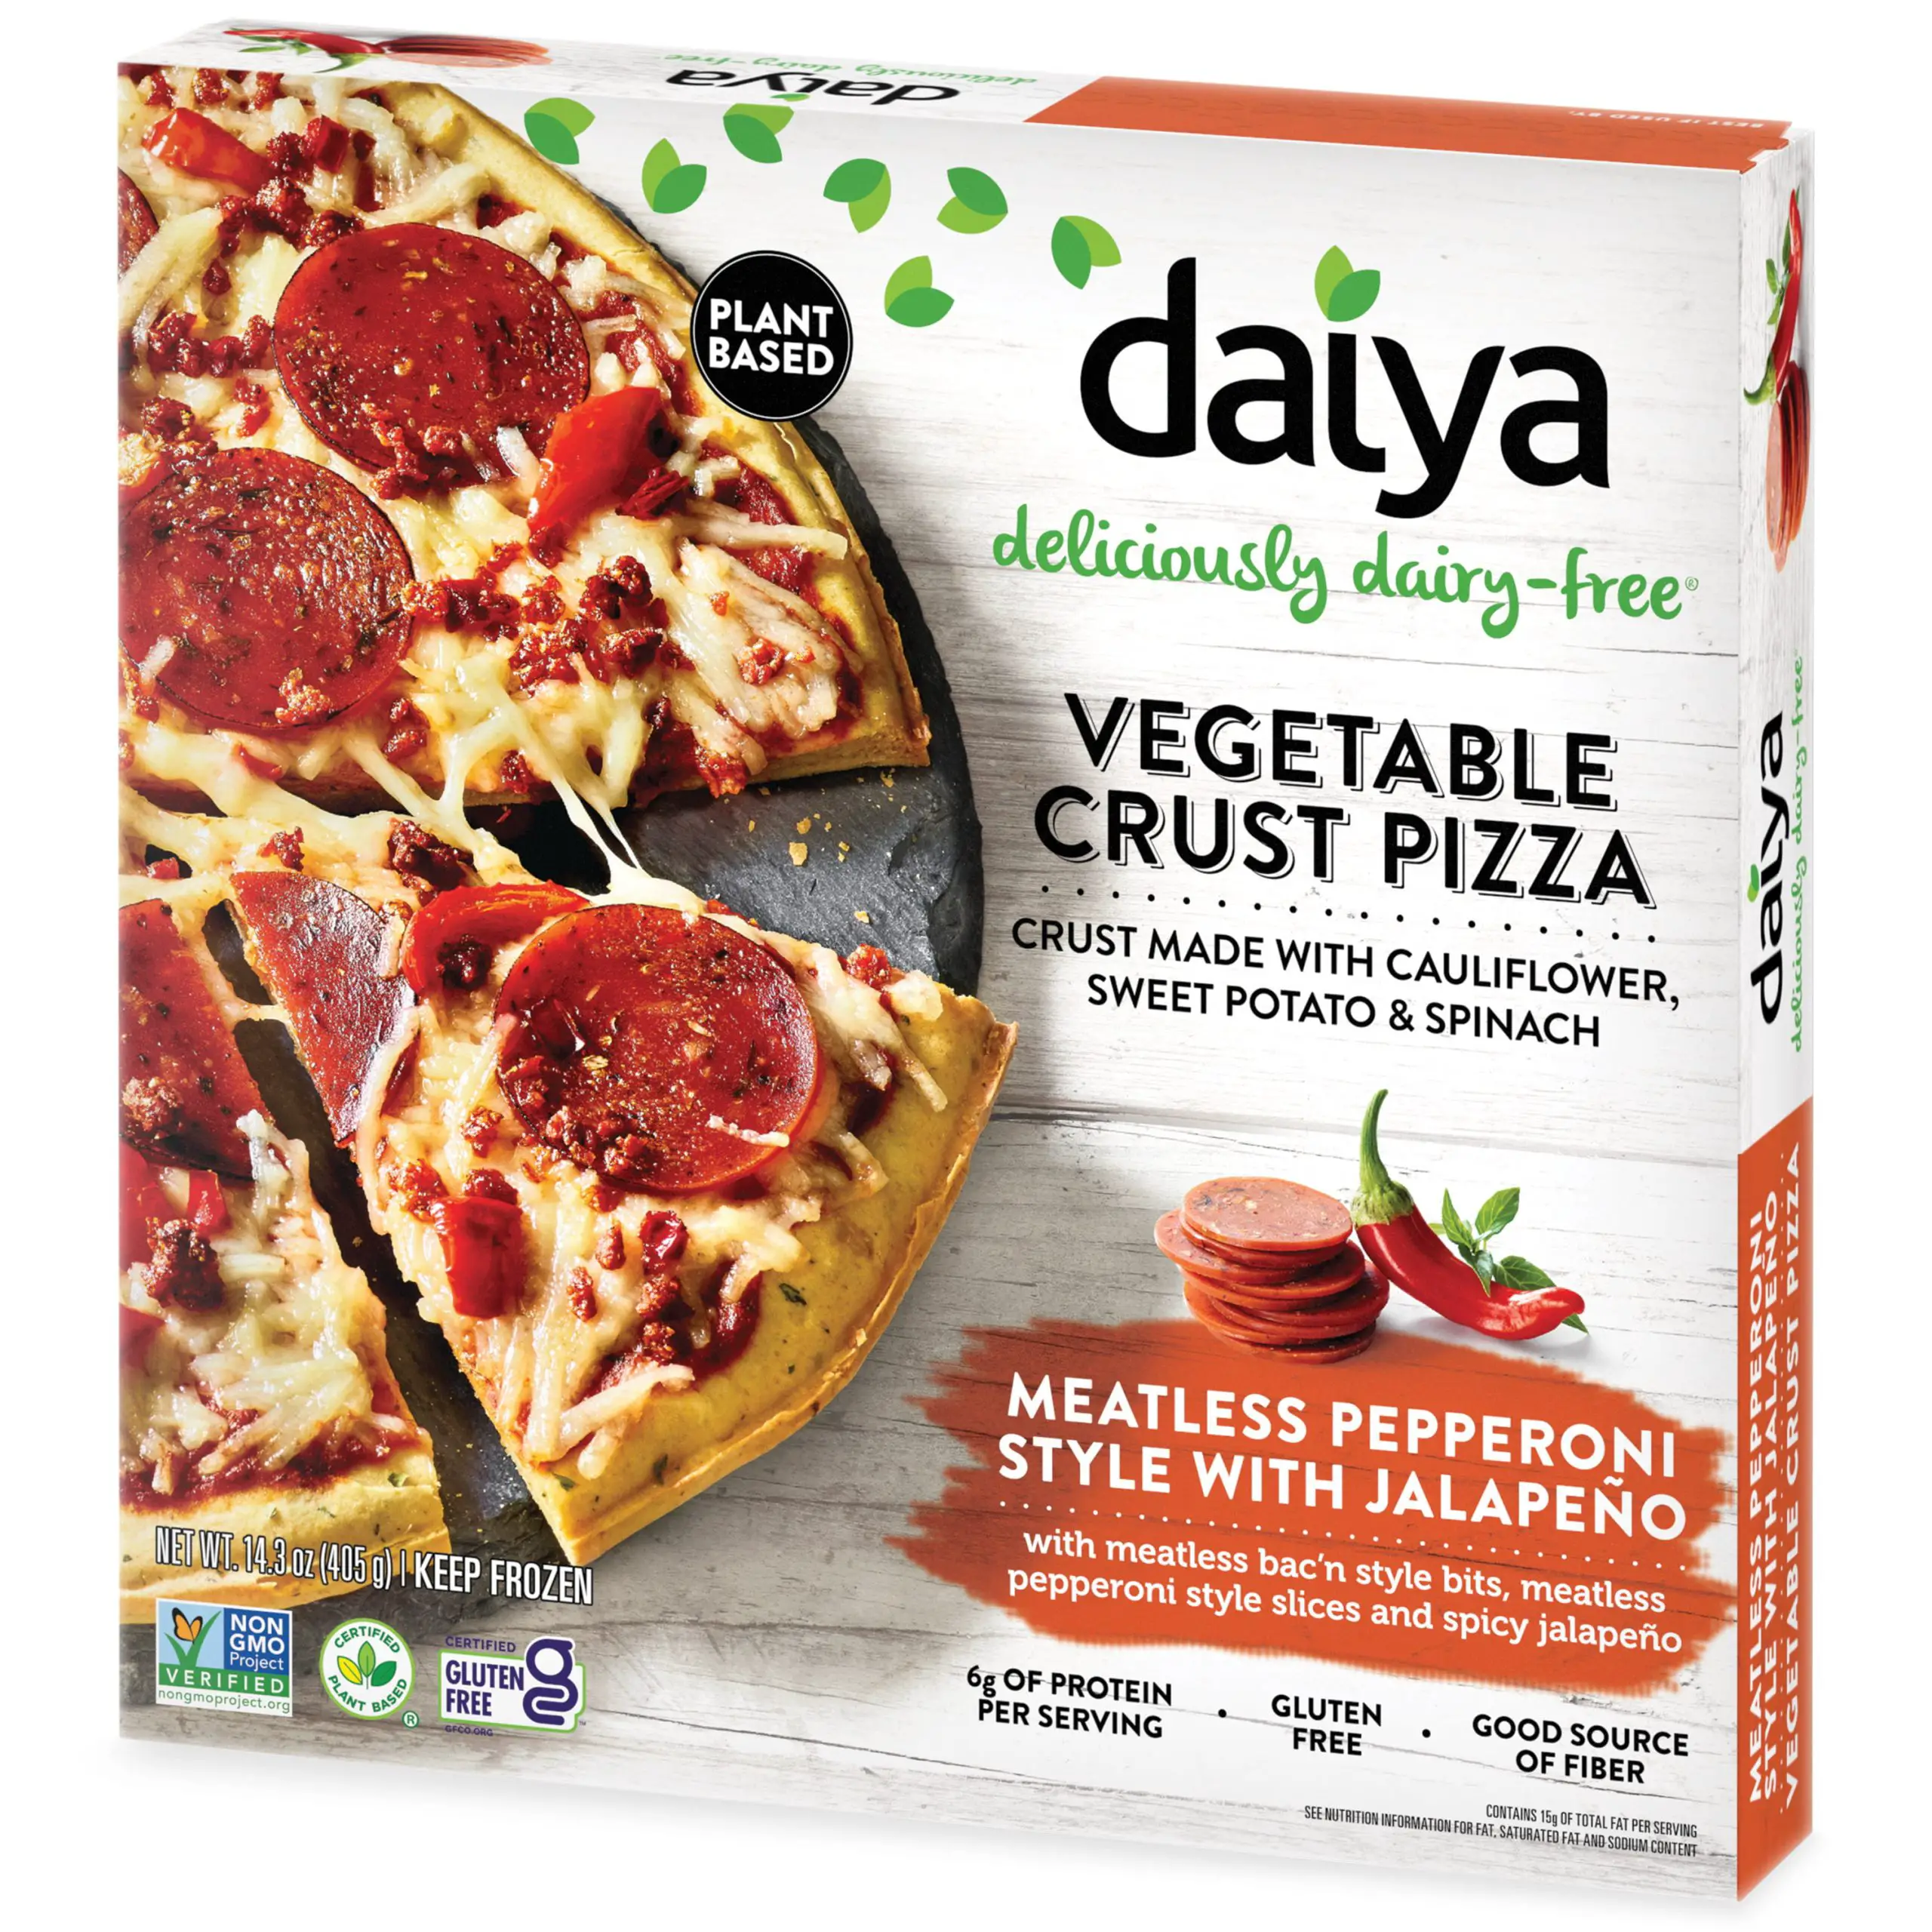 Daiya Meatless Pepperoni Style with JalapeÃ±o Vegetable Crust Pizza ...